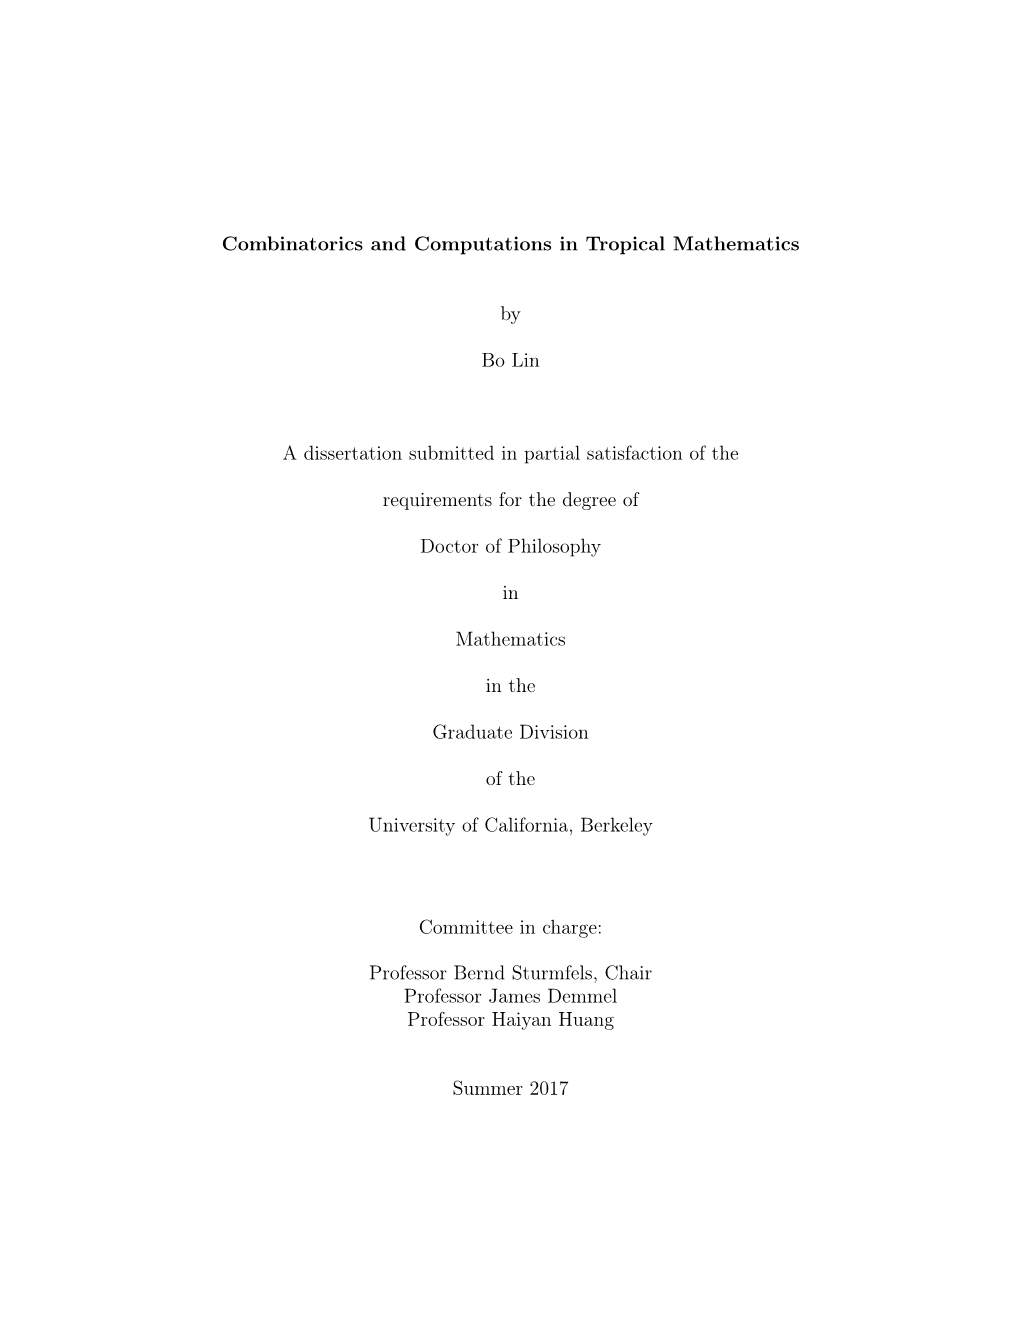 Combinatorics and Computations in Tropical Mathematics by Bo Lin A